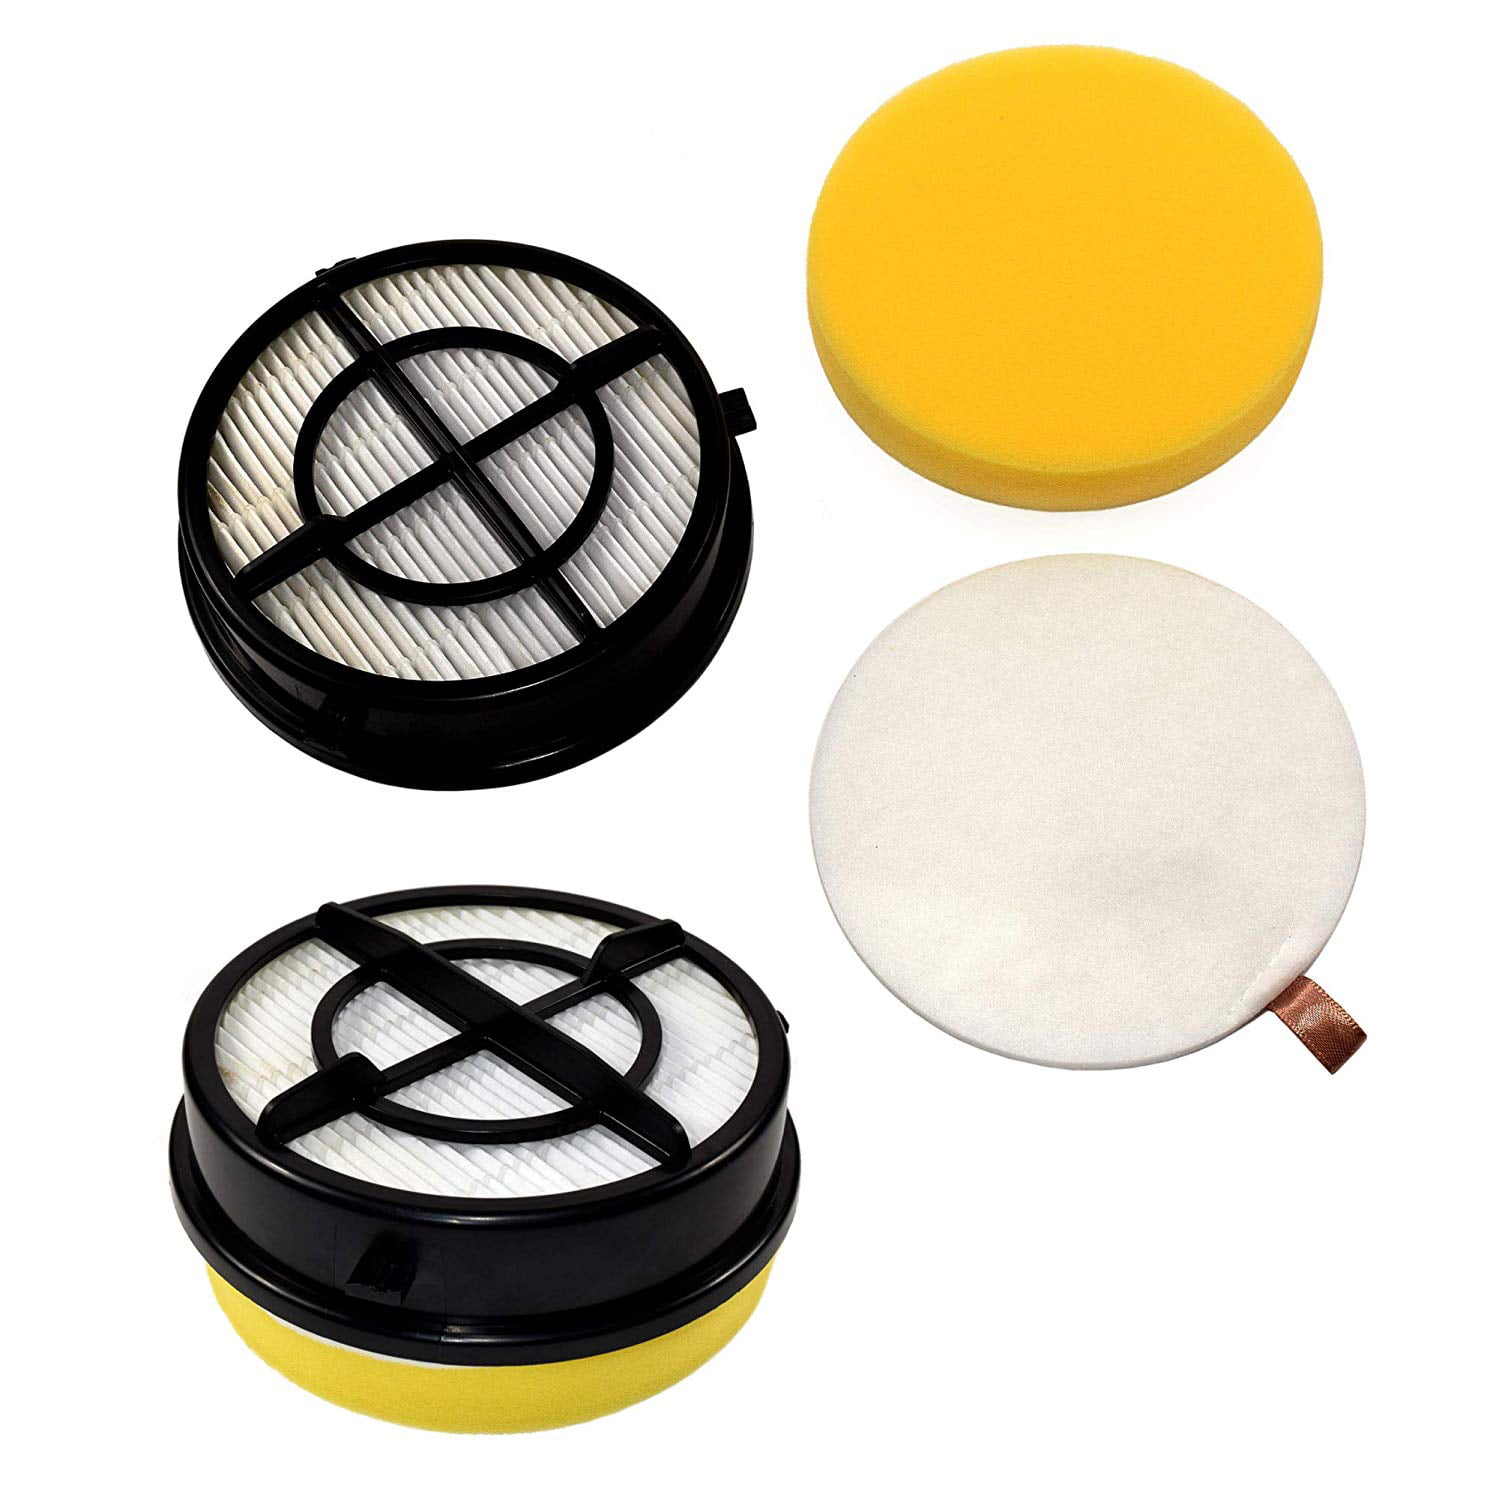 1608860 Replace 1608861 LTWHOME Replacement 16871 Filter Kit for Bissell Pet Hair Eraser Febreze Upright Vacuum Filter Model 1650 Series Pack of 2 Sets 160-8861 & 160-8860